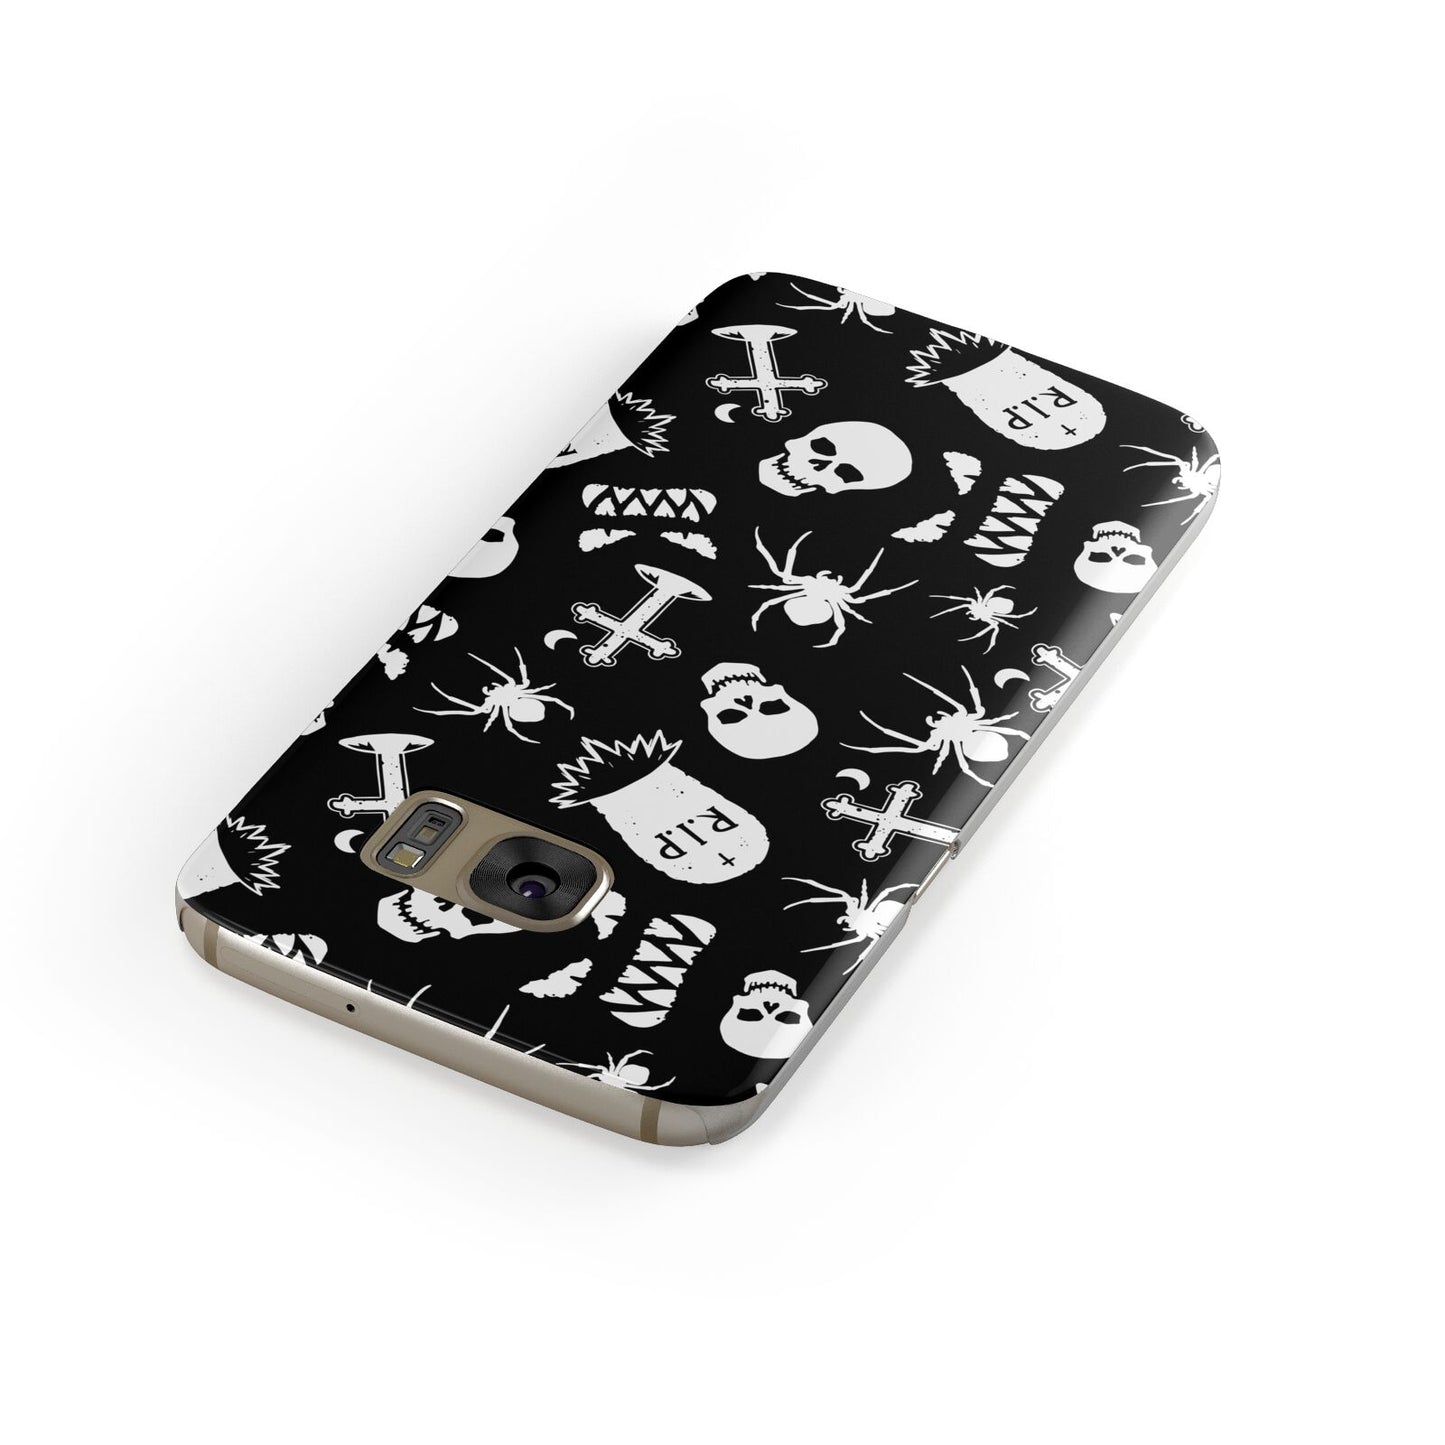 Spooky Illustrations Samsung Galaxy Case Front Close Up